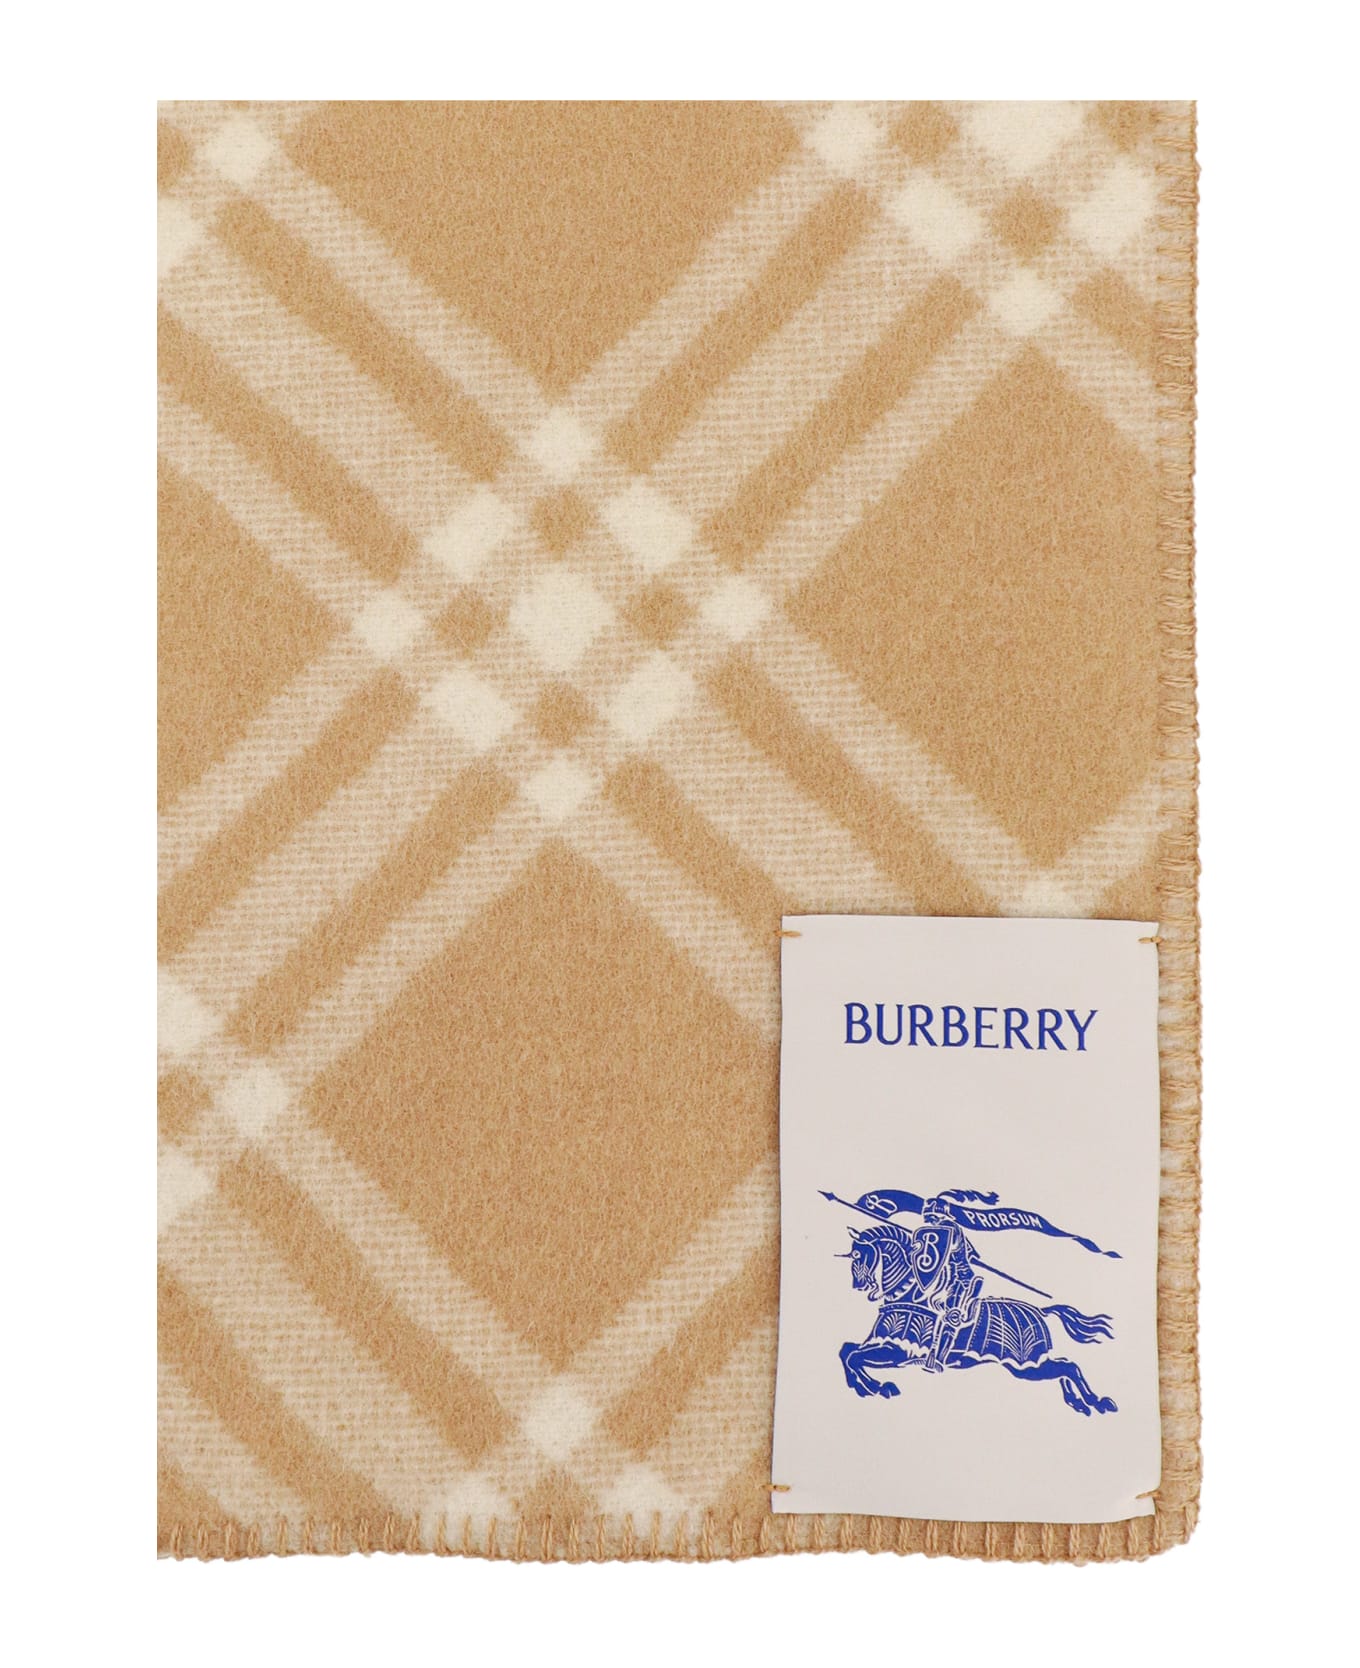 Burberry Archive Beige Wool Scarf With Vintage Check Pattern - Beige